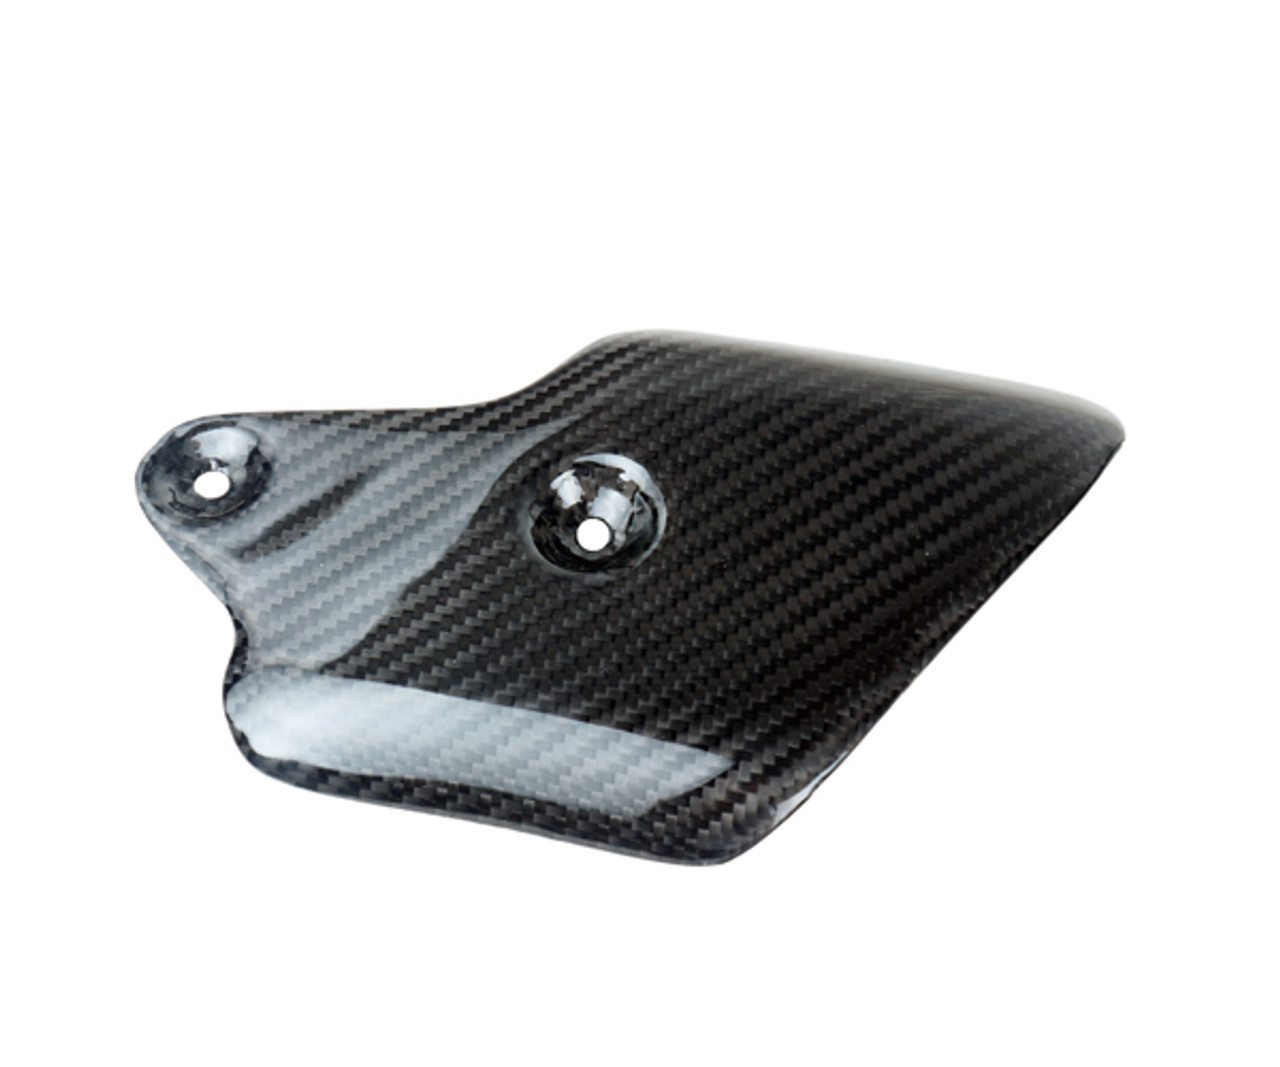 Exhaust Cover ( Heat Foil inside) in Glossy Twill Weave Carbon Fiber for Ducati 748, 916, 996, 998